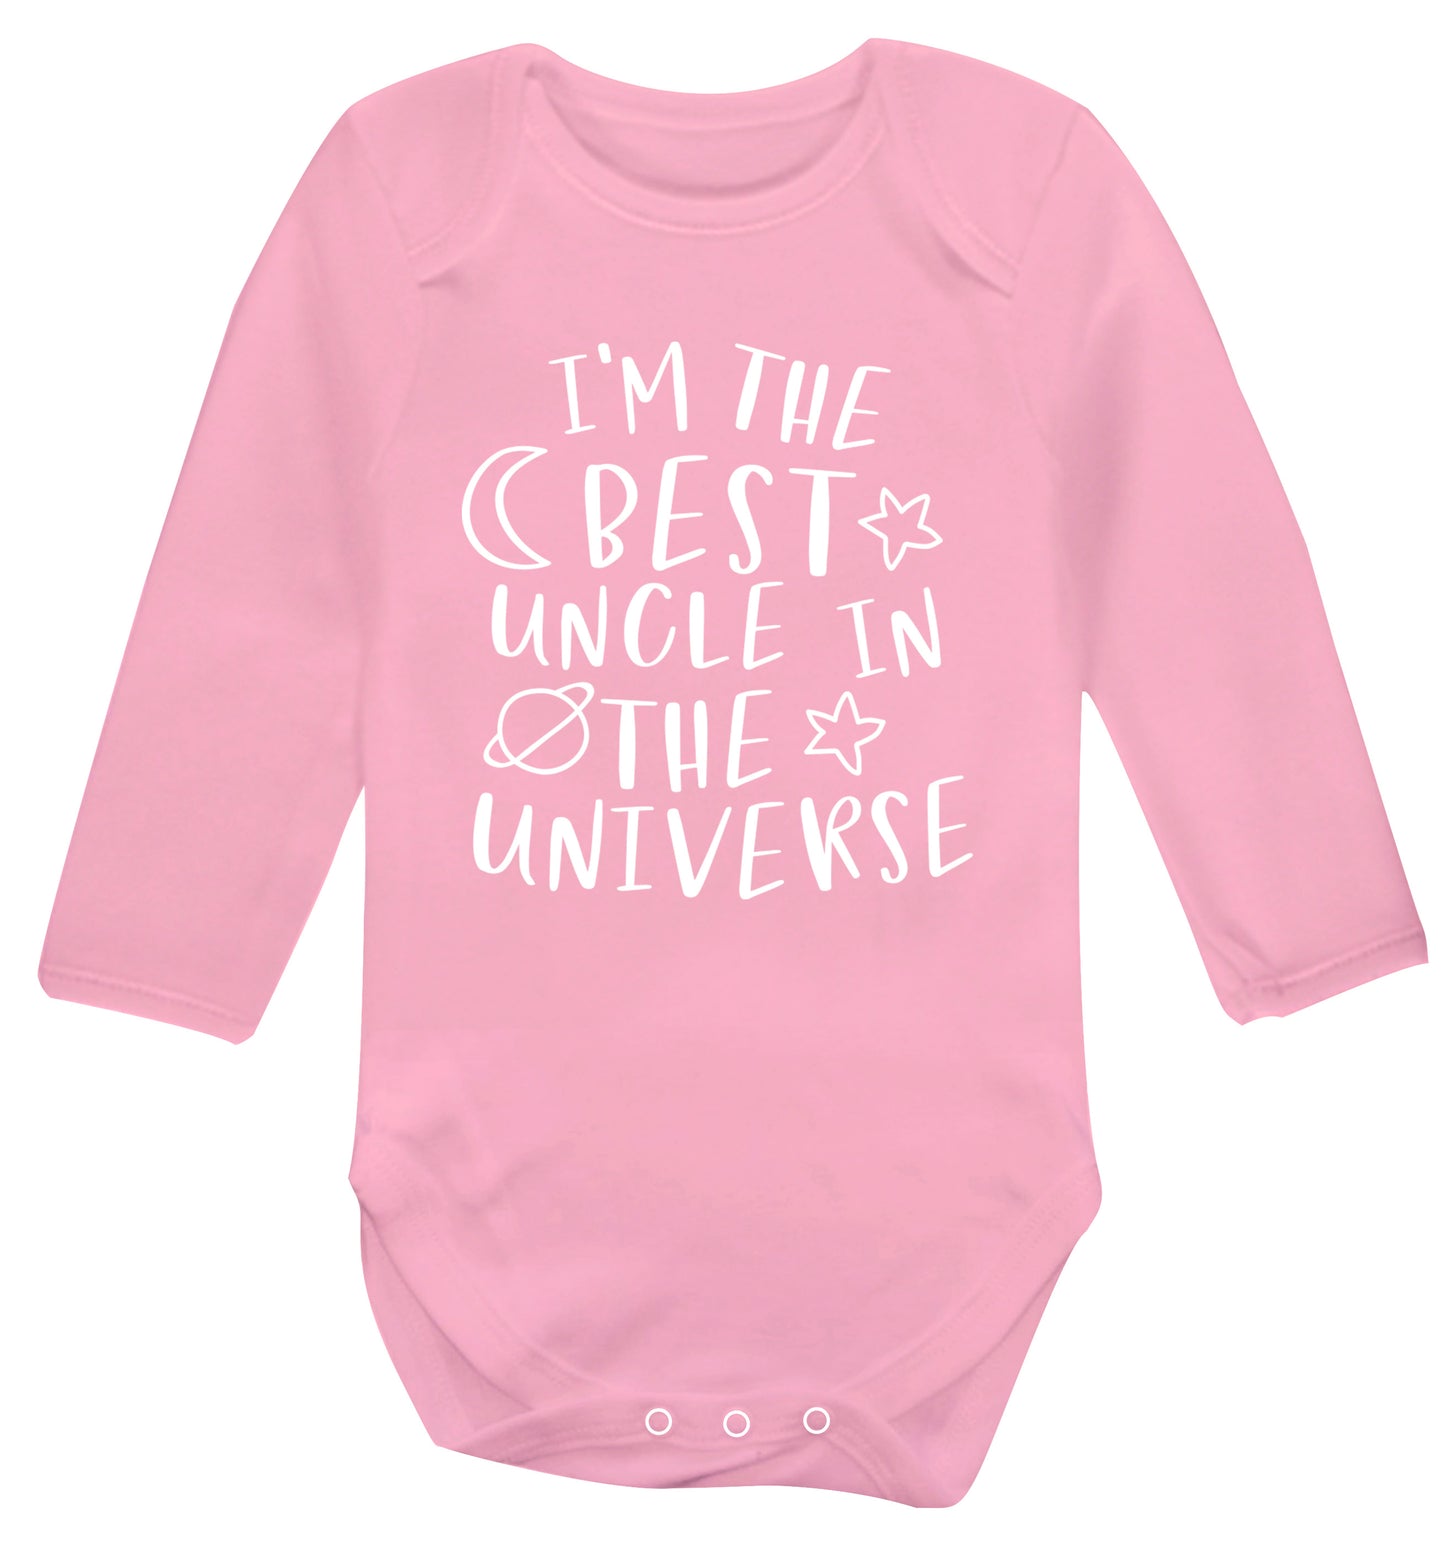 I'm the best uncle in the universe Baby Vest long sleeved pale pink 6-12 months